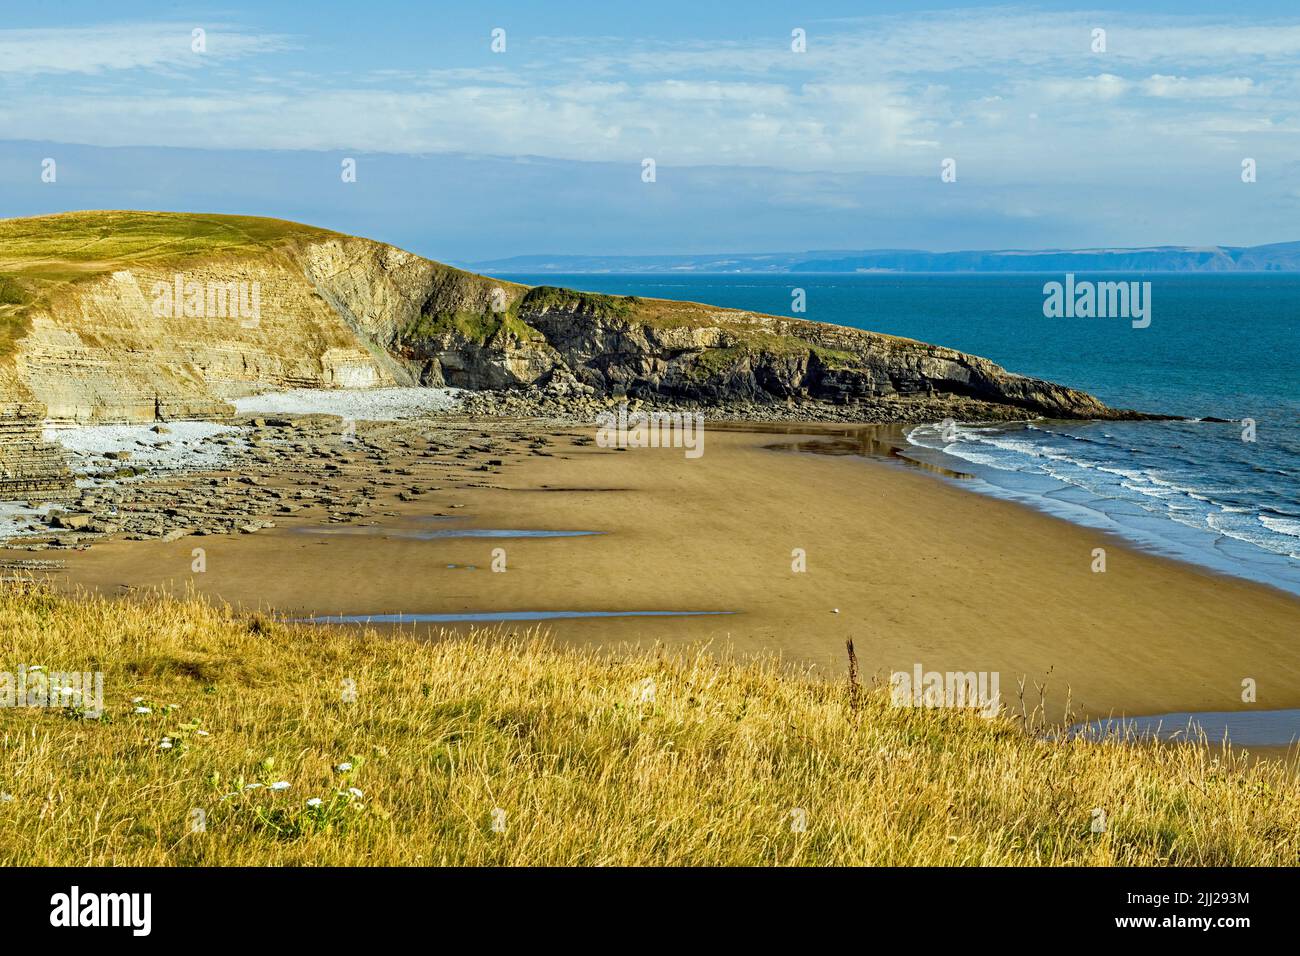 Duntaven Bay Photographed from Above on the cliffs Stock Photo